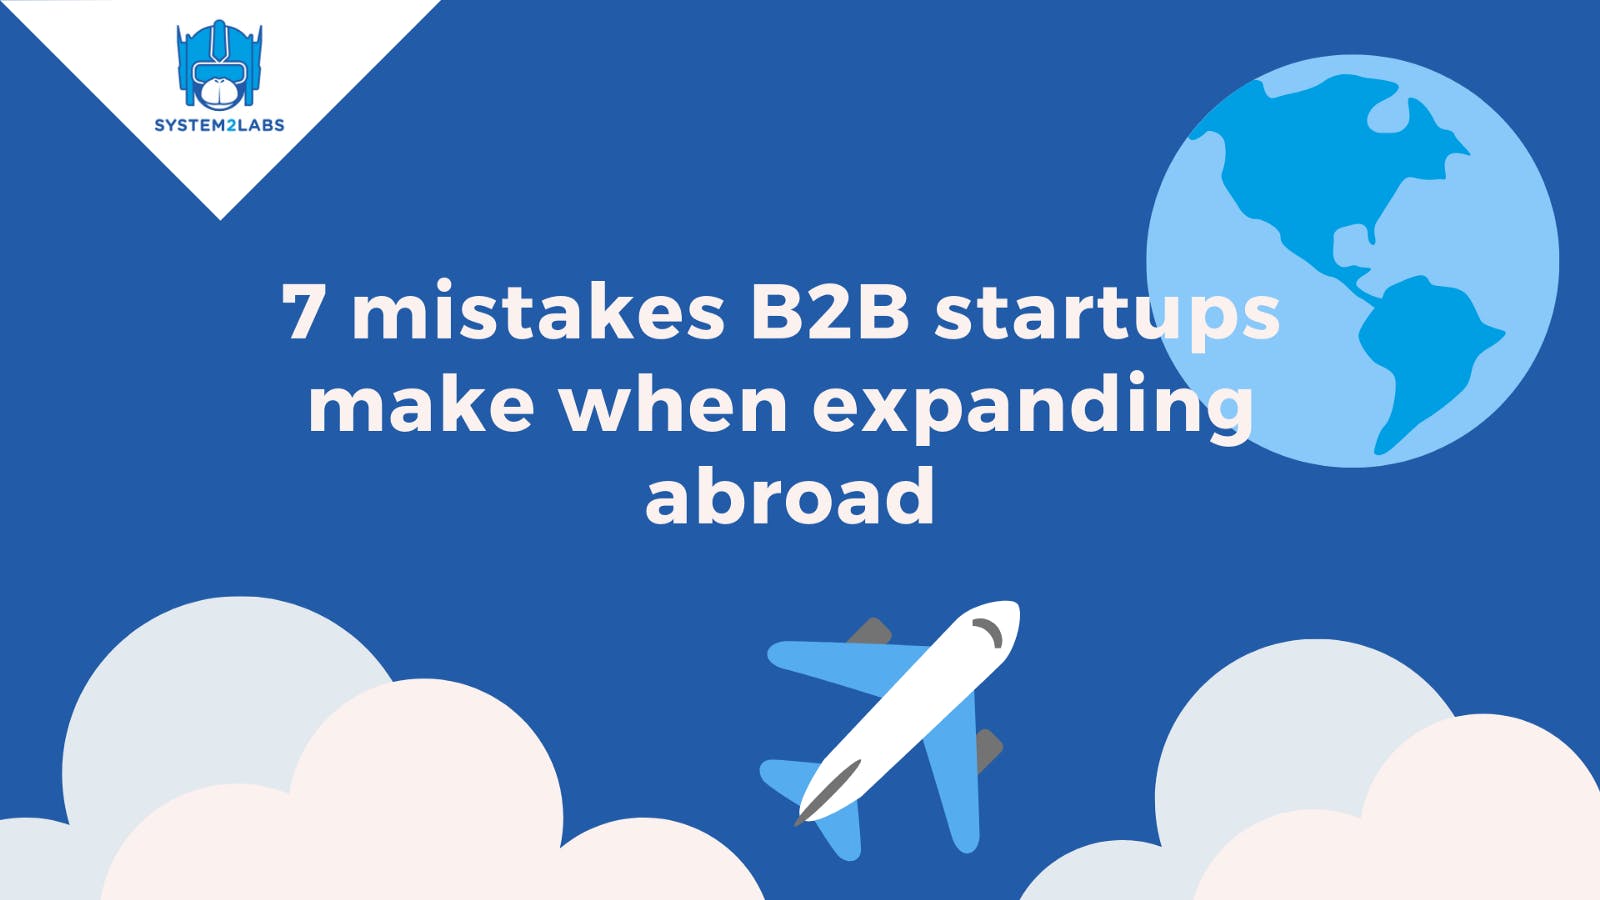 featured image - 7 mistakes B2B startups make when expanding abroad